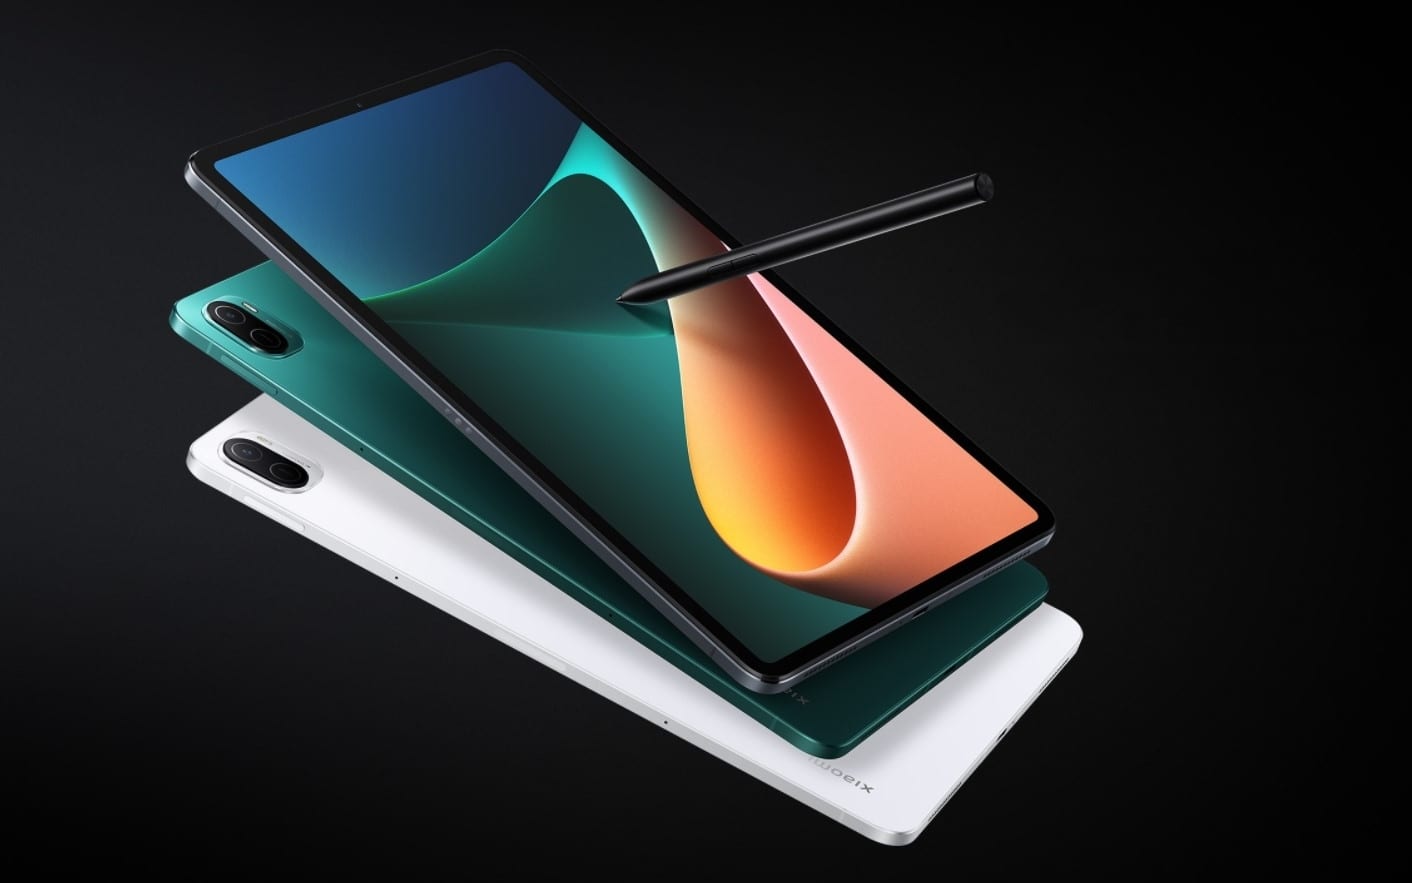 Xiaomi is totally coming for Apple's iPad with the new Mi Pad 5